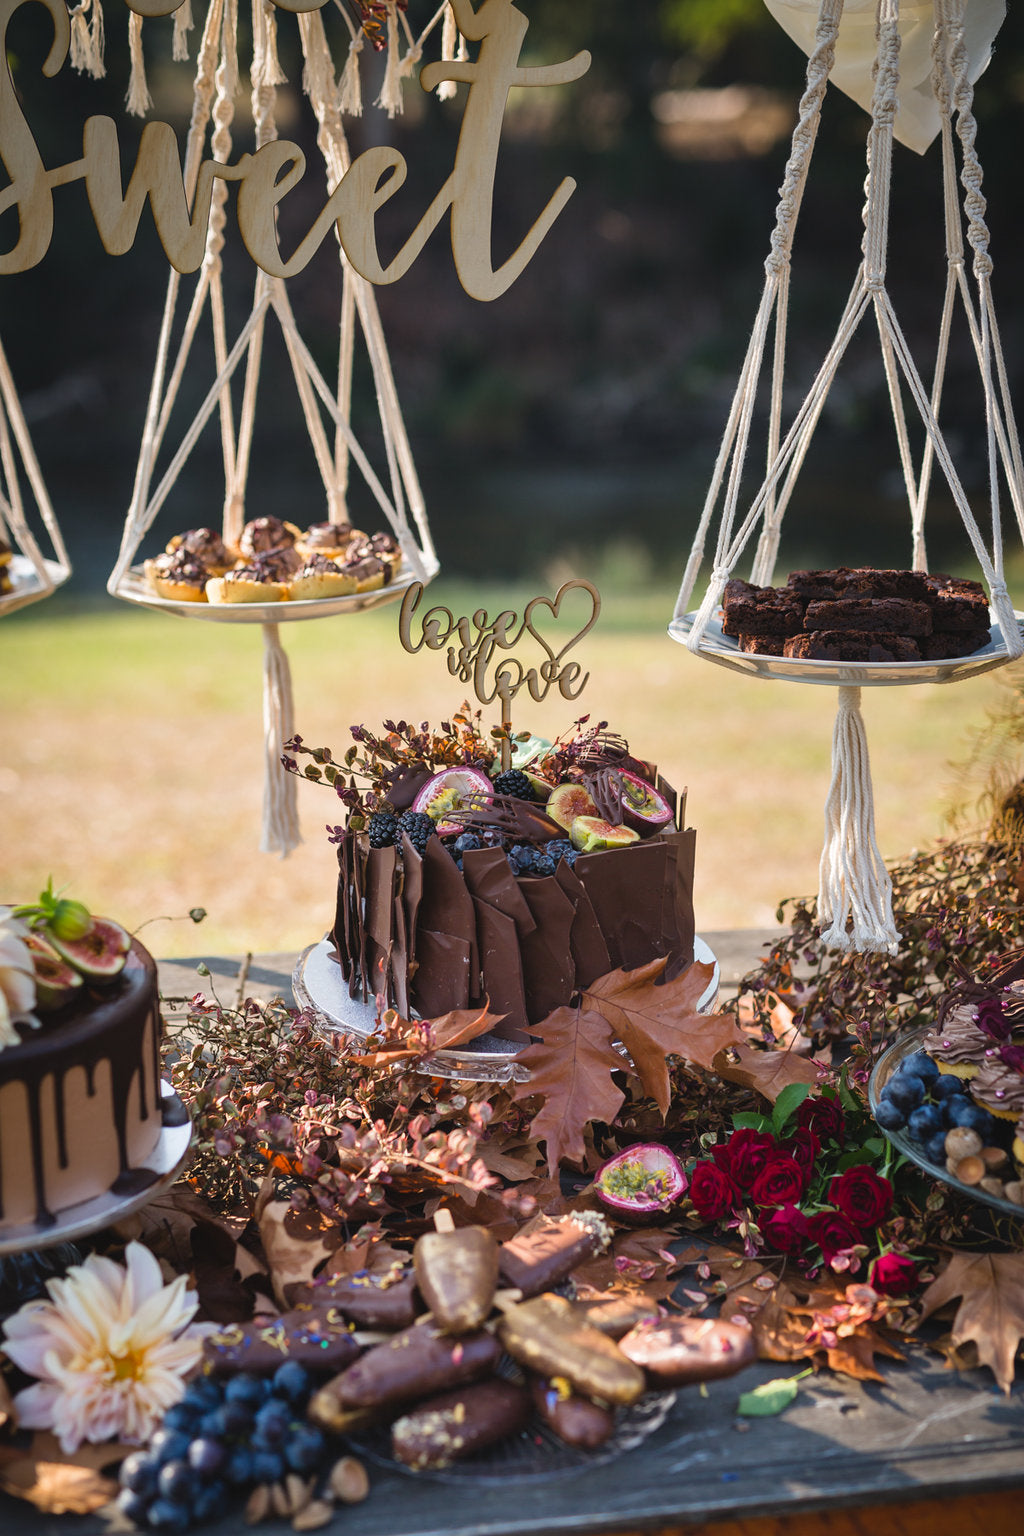 Grazing Dessert Cake Table Picnic By The Yarra